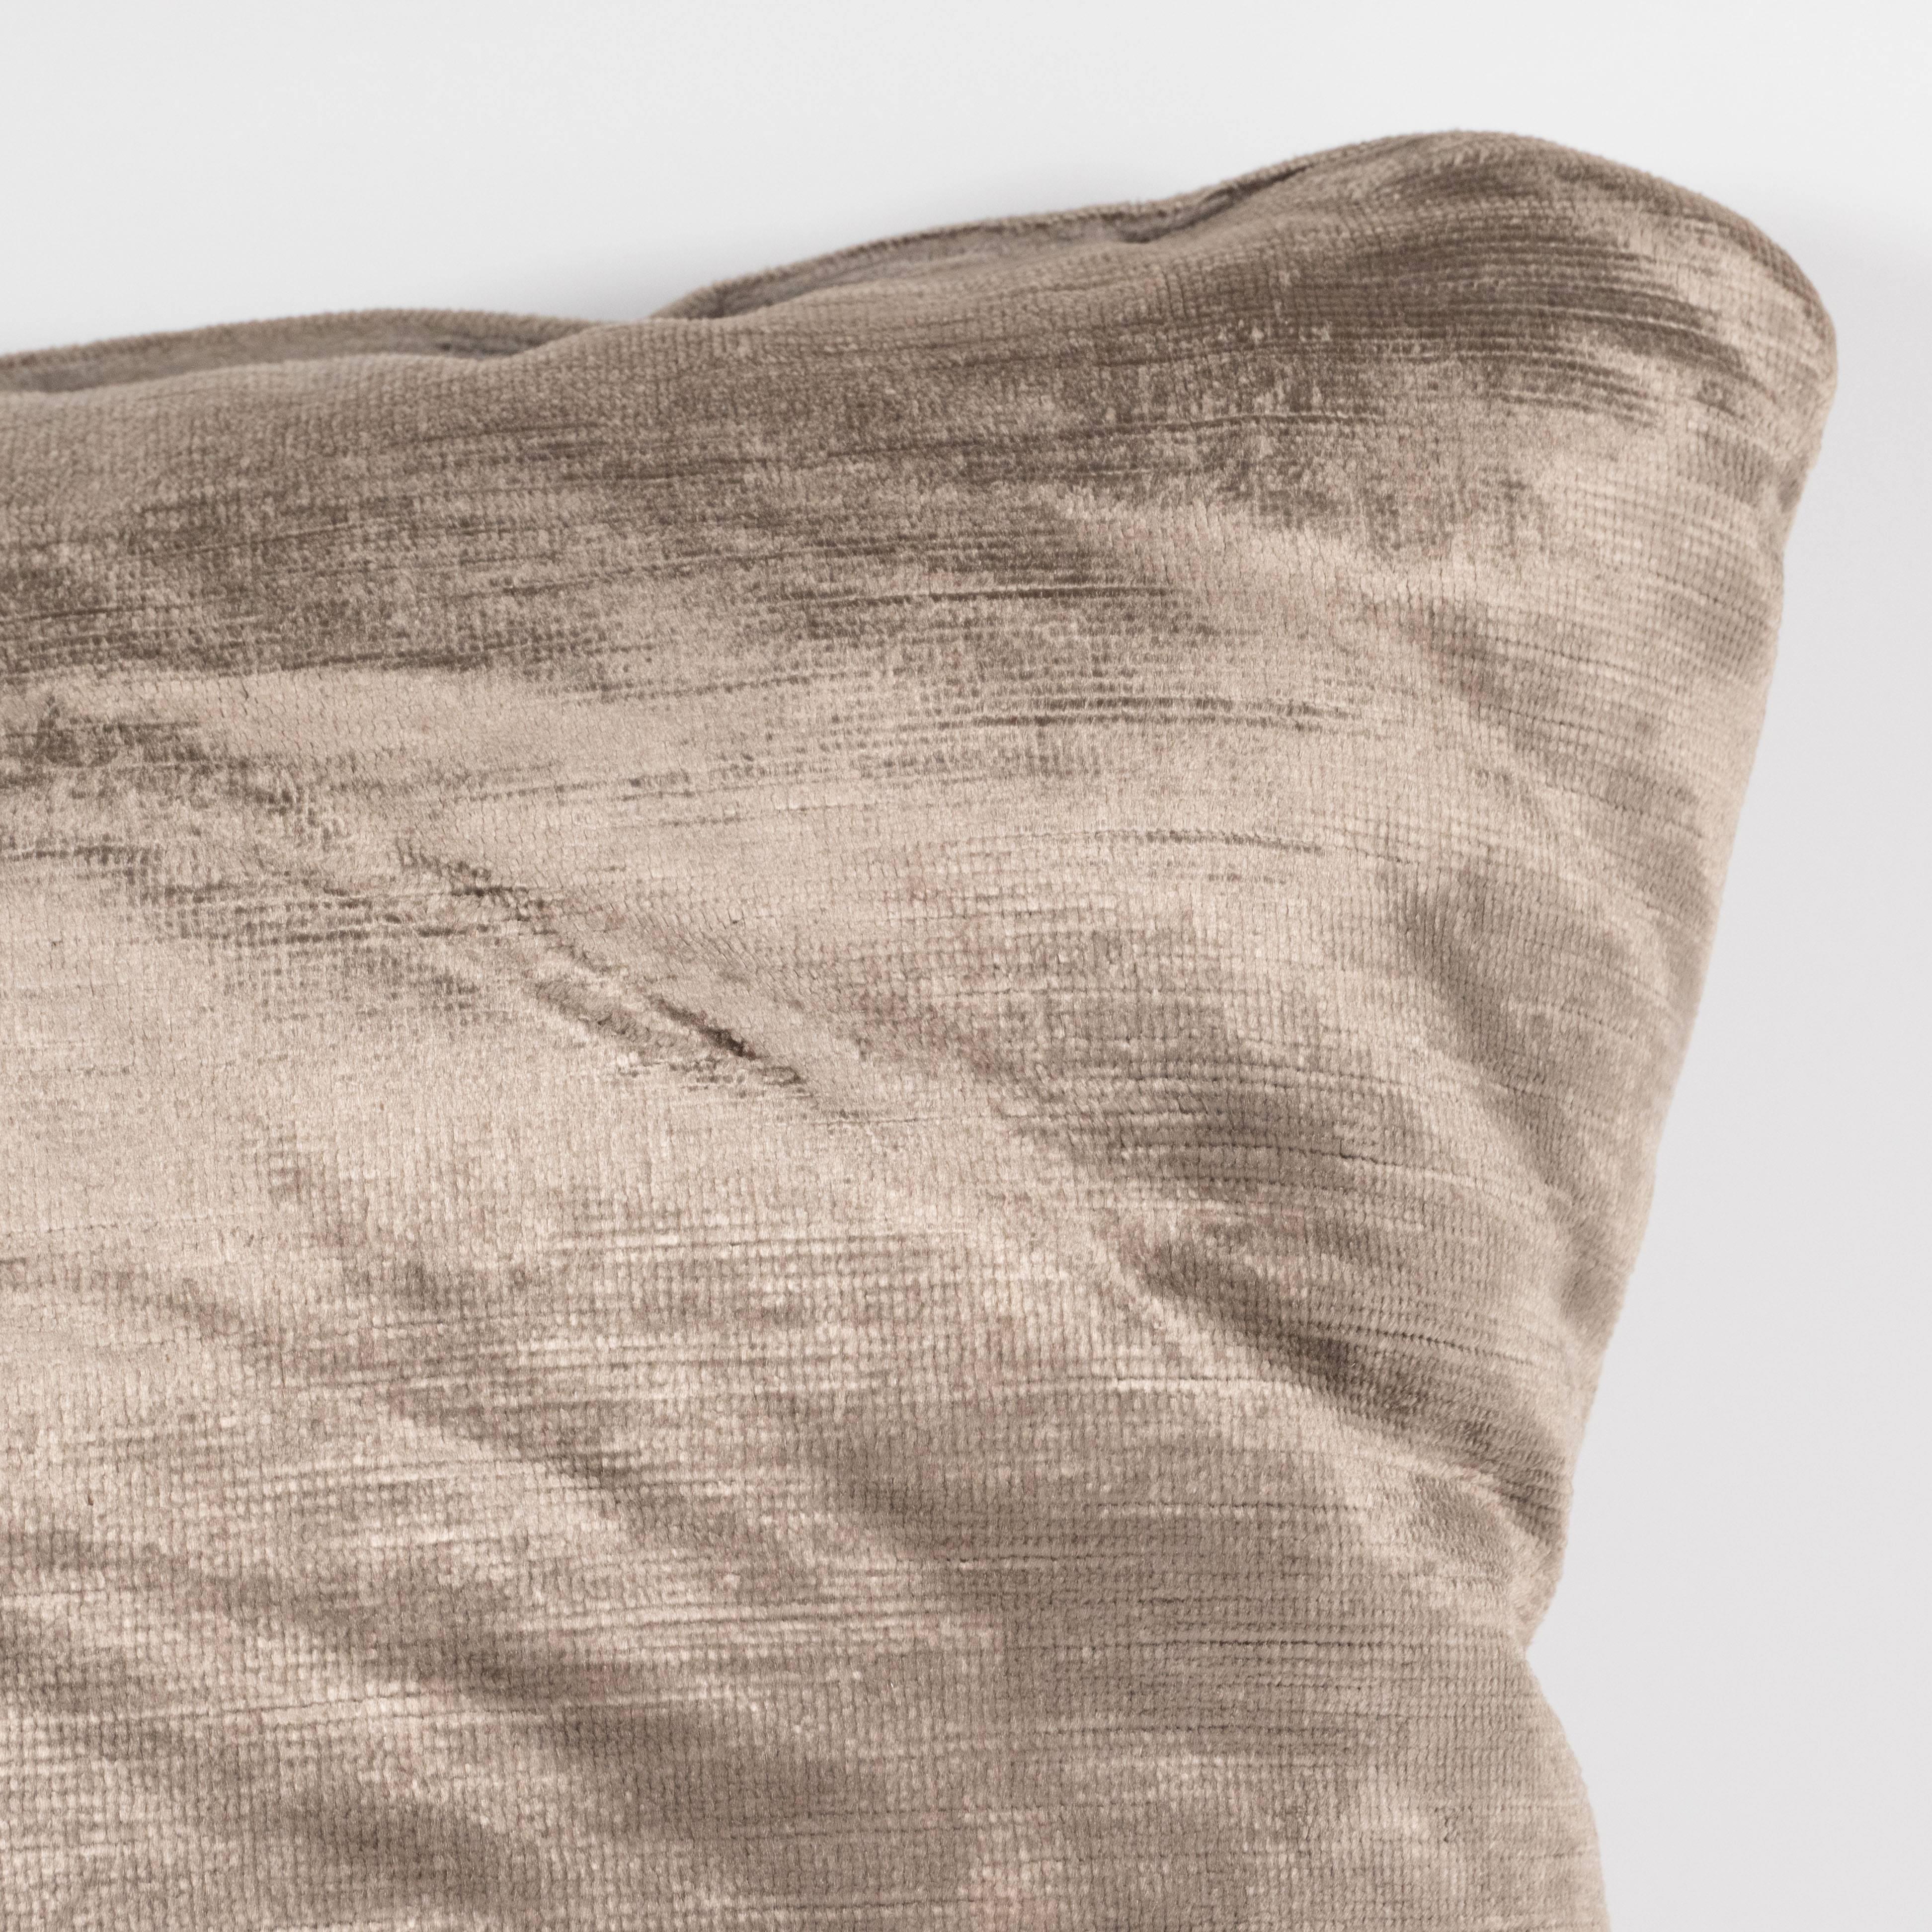 This gorgeous pillow, realized in a rich smoked taupe hue, features the gentle luster characteristic of the finest velvet. Its color tone reads as both neutral, suggesting antiqued pewter and organic. Its simple form and versatile shade- matching